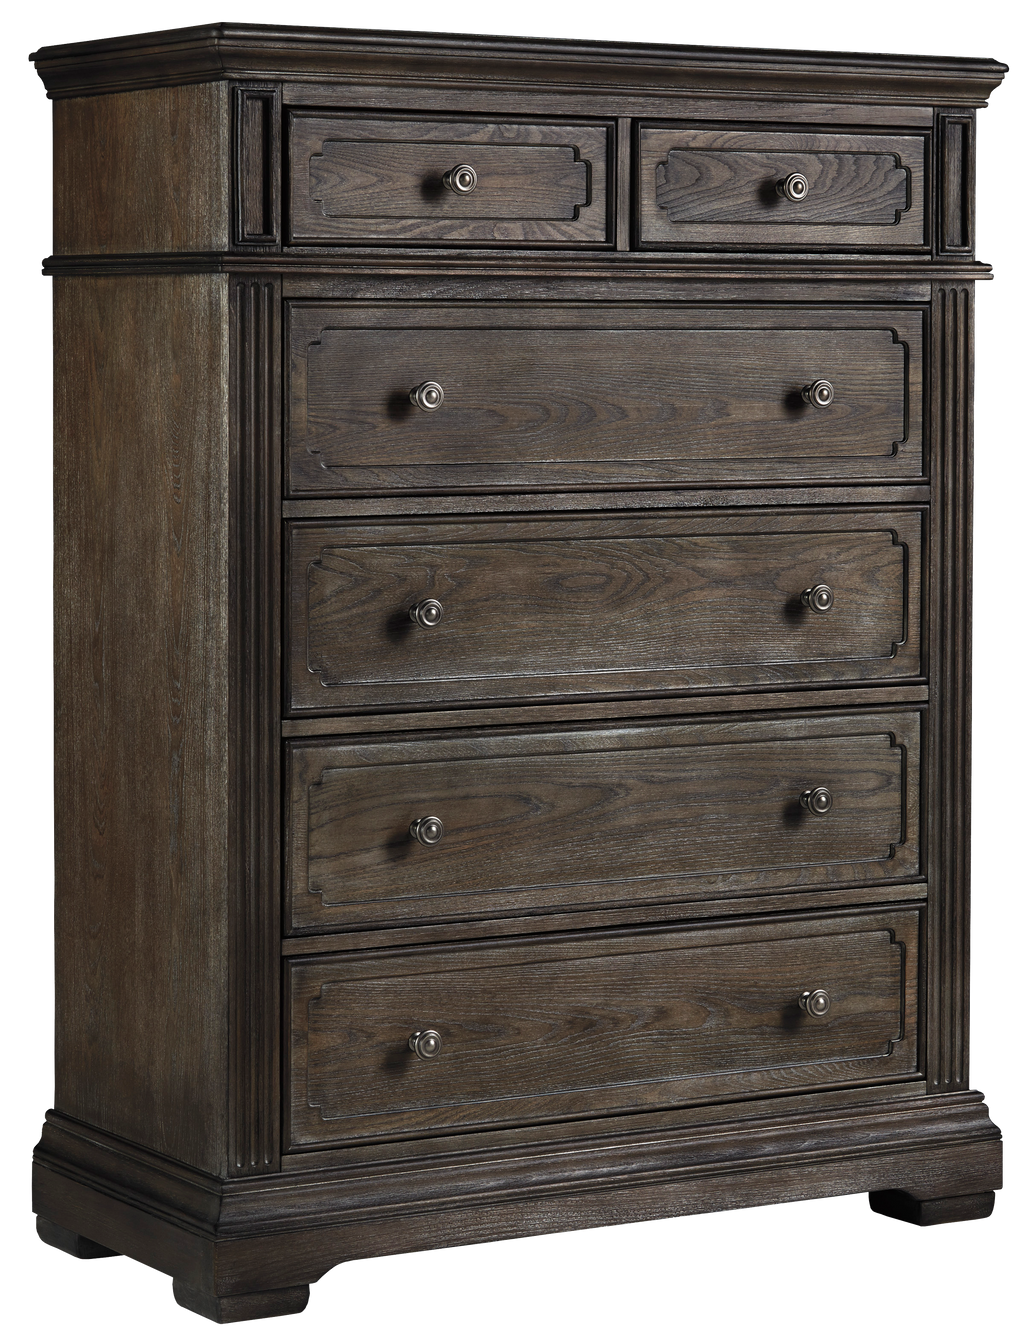 Mikalene Chest of Drawers